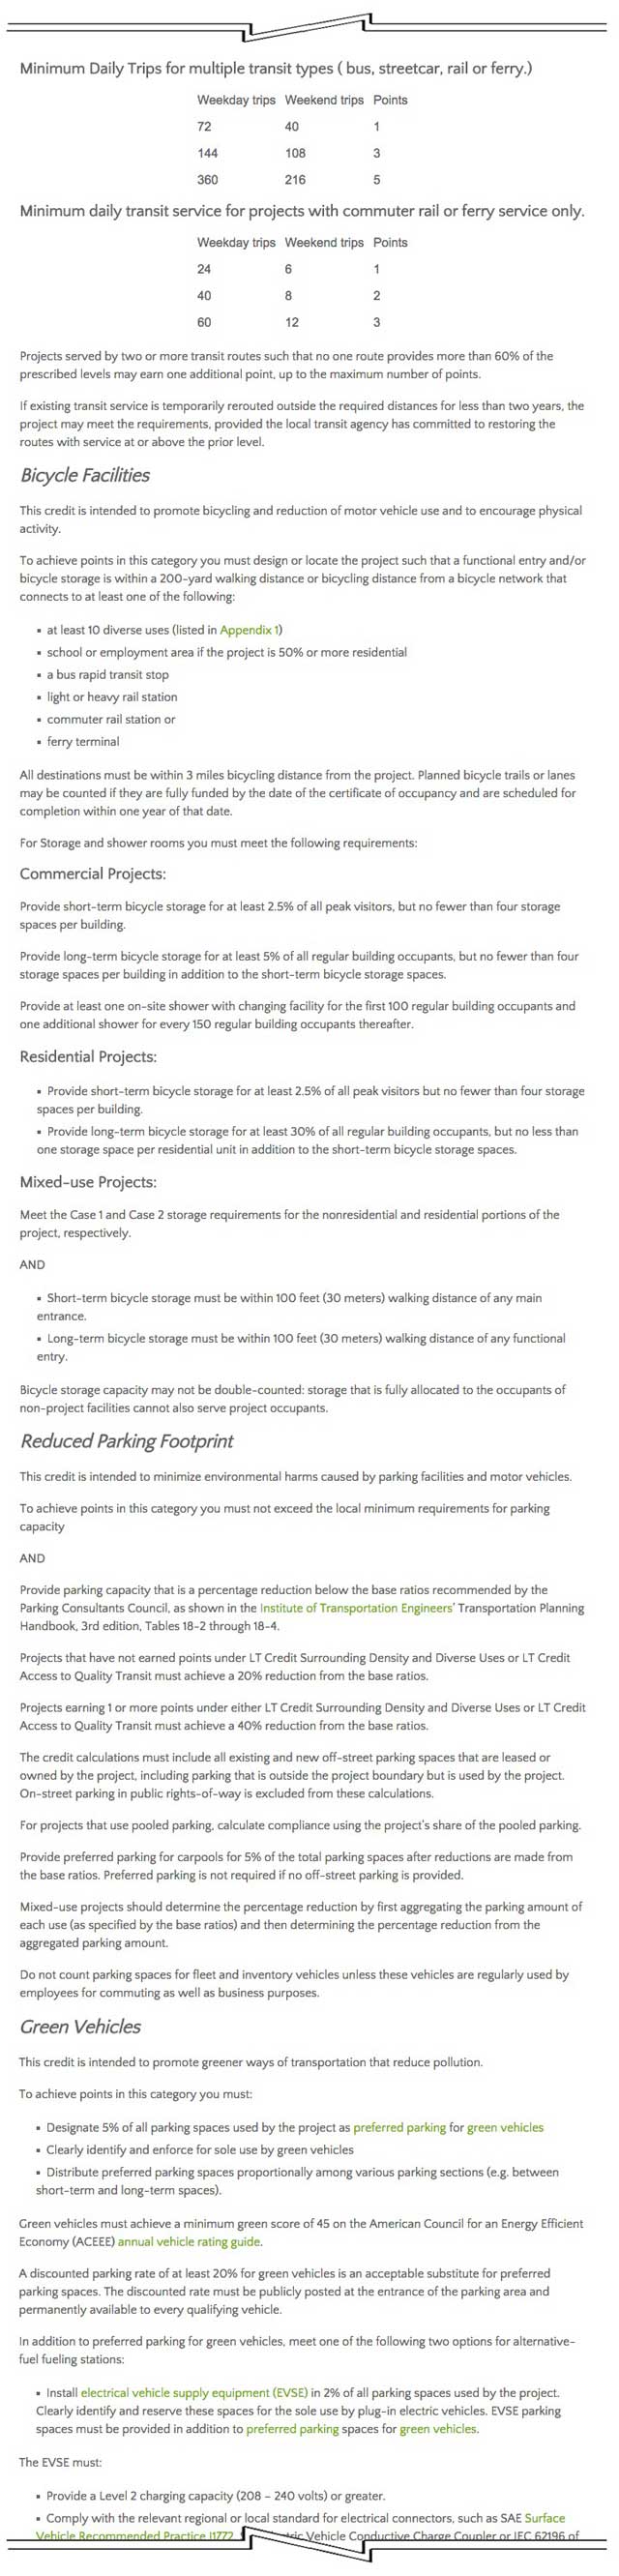 Jacky Tustain (Project Manager) also continued helping us convert the LEED Certification research done by Matheus Manfredini (Civil Engineering Student and Urban Design Coordinator) into a webpage. Here are the 3rd round of pictures of this LEED Tutorial page developing on the site, continuing with formatting and content editing. We'd say we're about 40% complete with this tutorial.